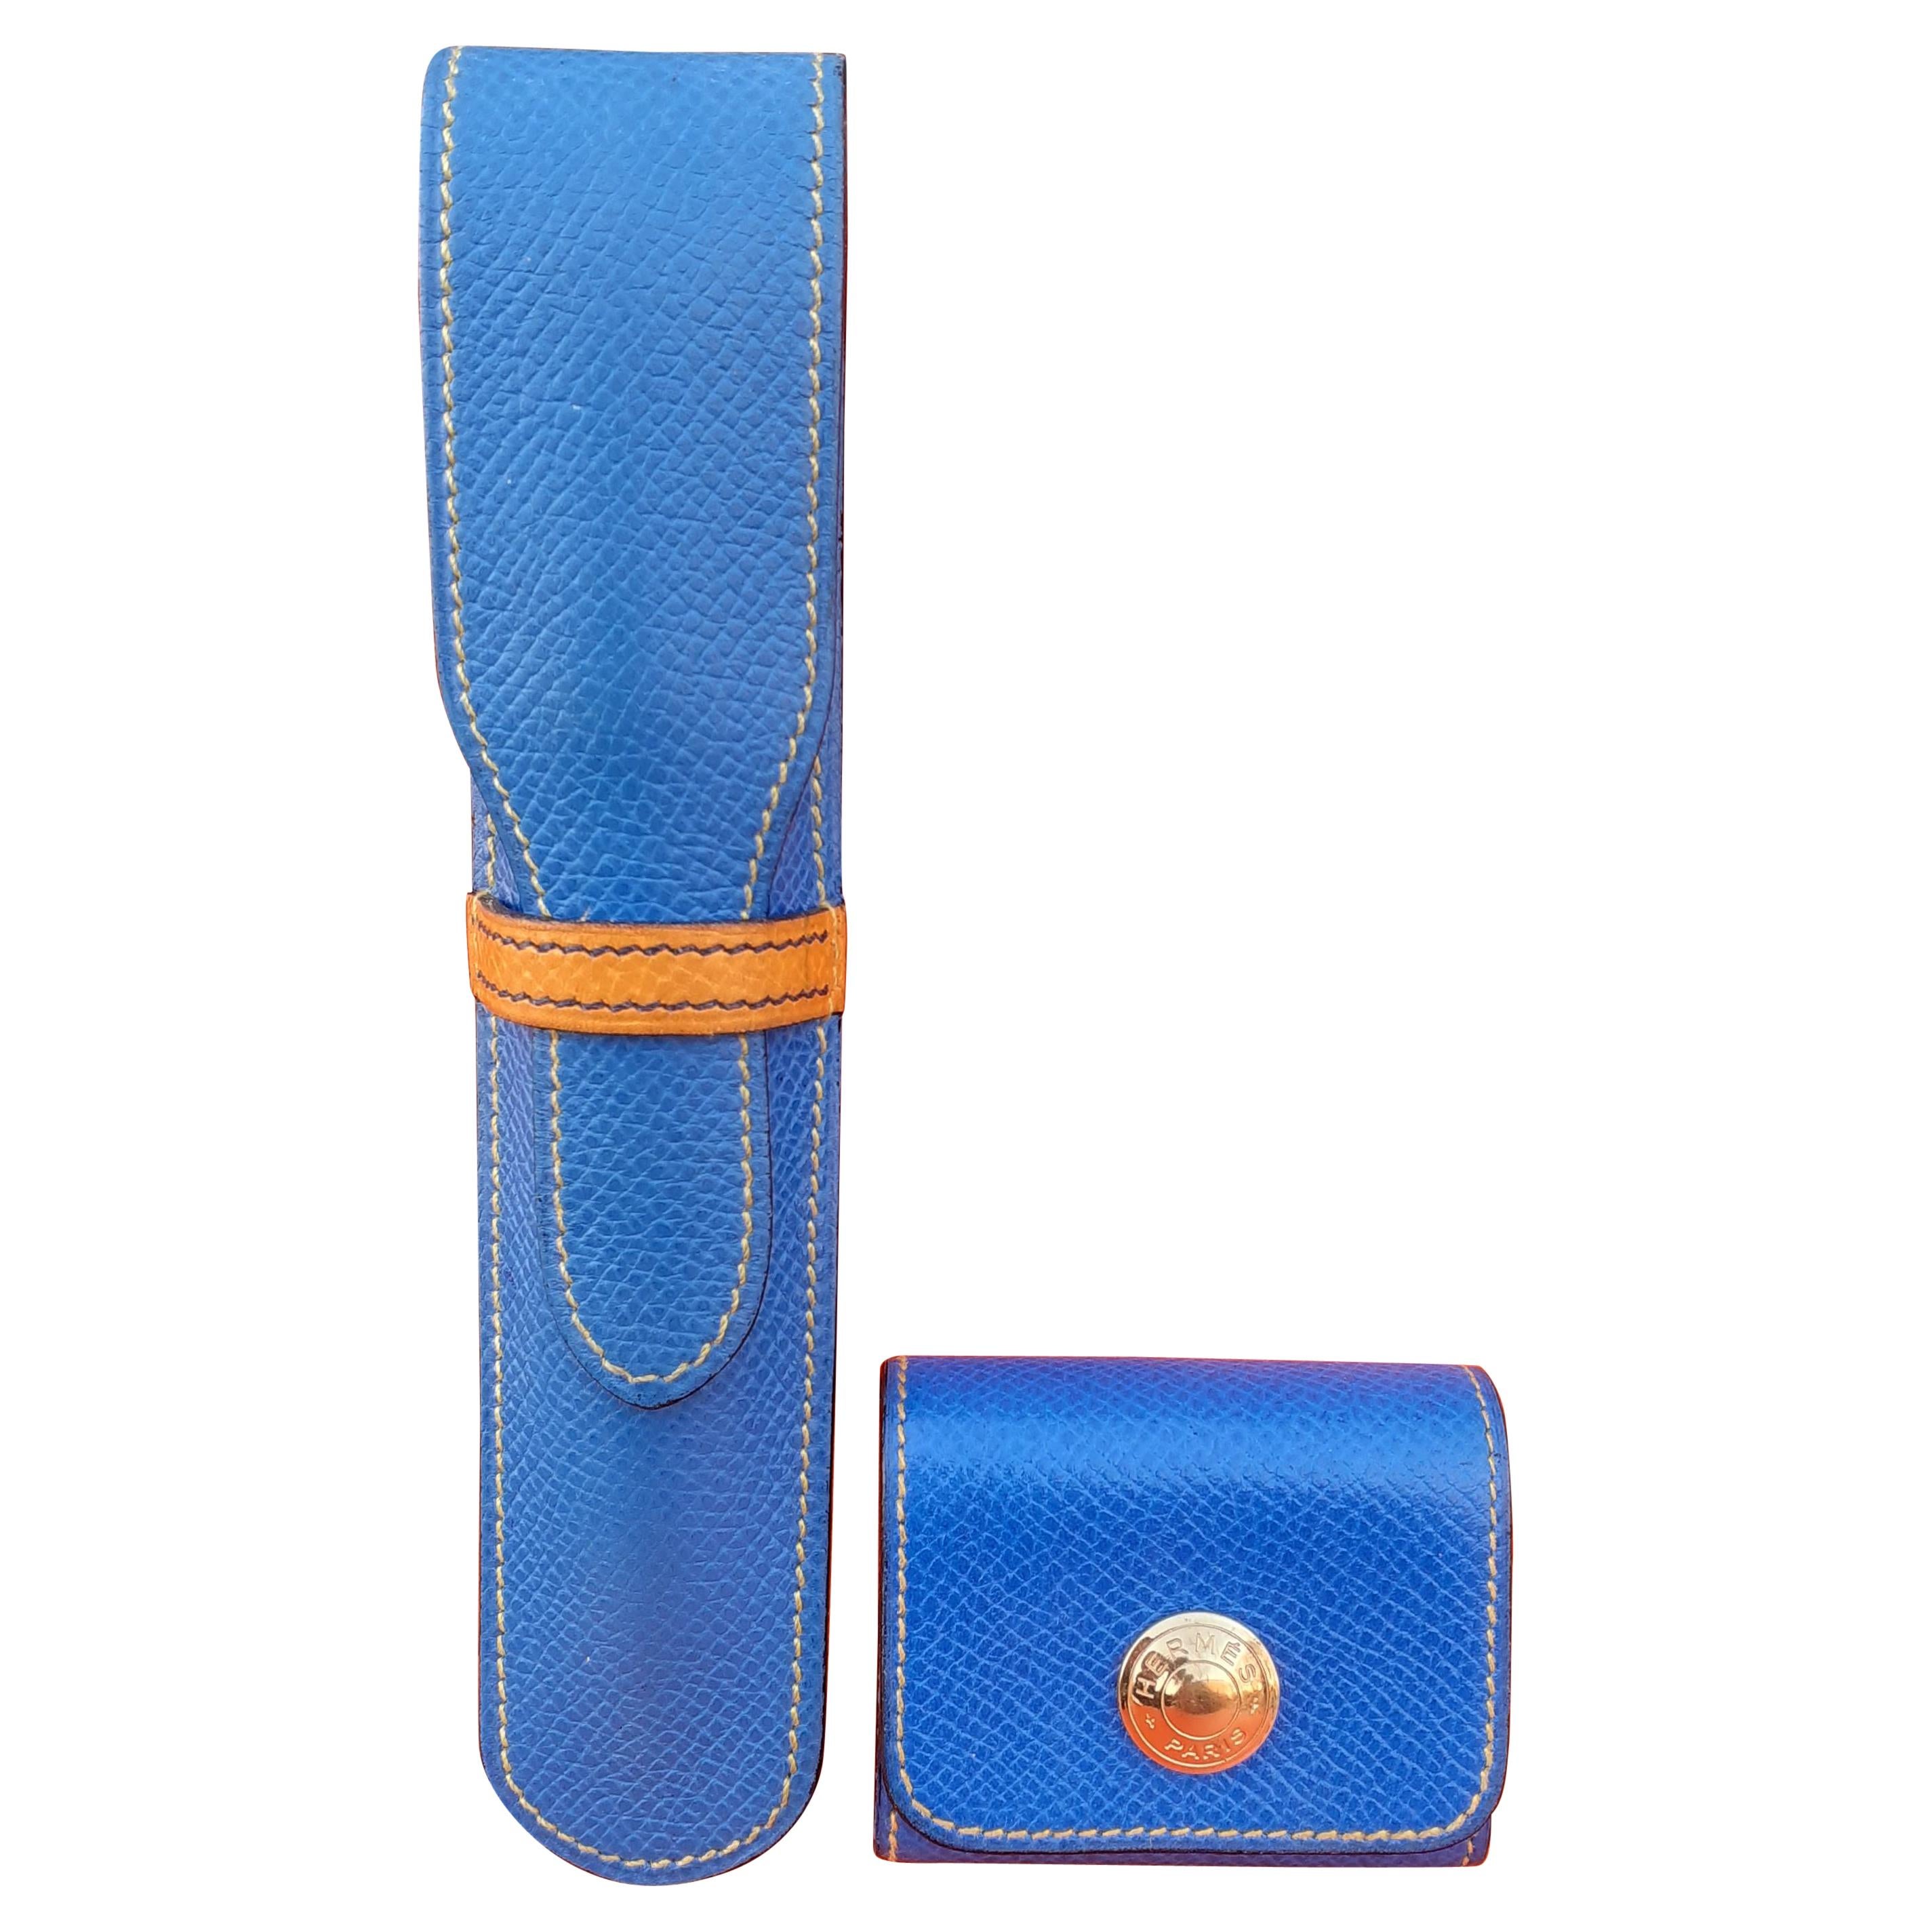 Hermès Set of Pencil Case and Sticky Notes Cover Blue Yellow Leather